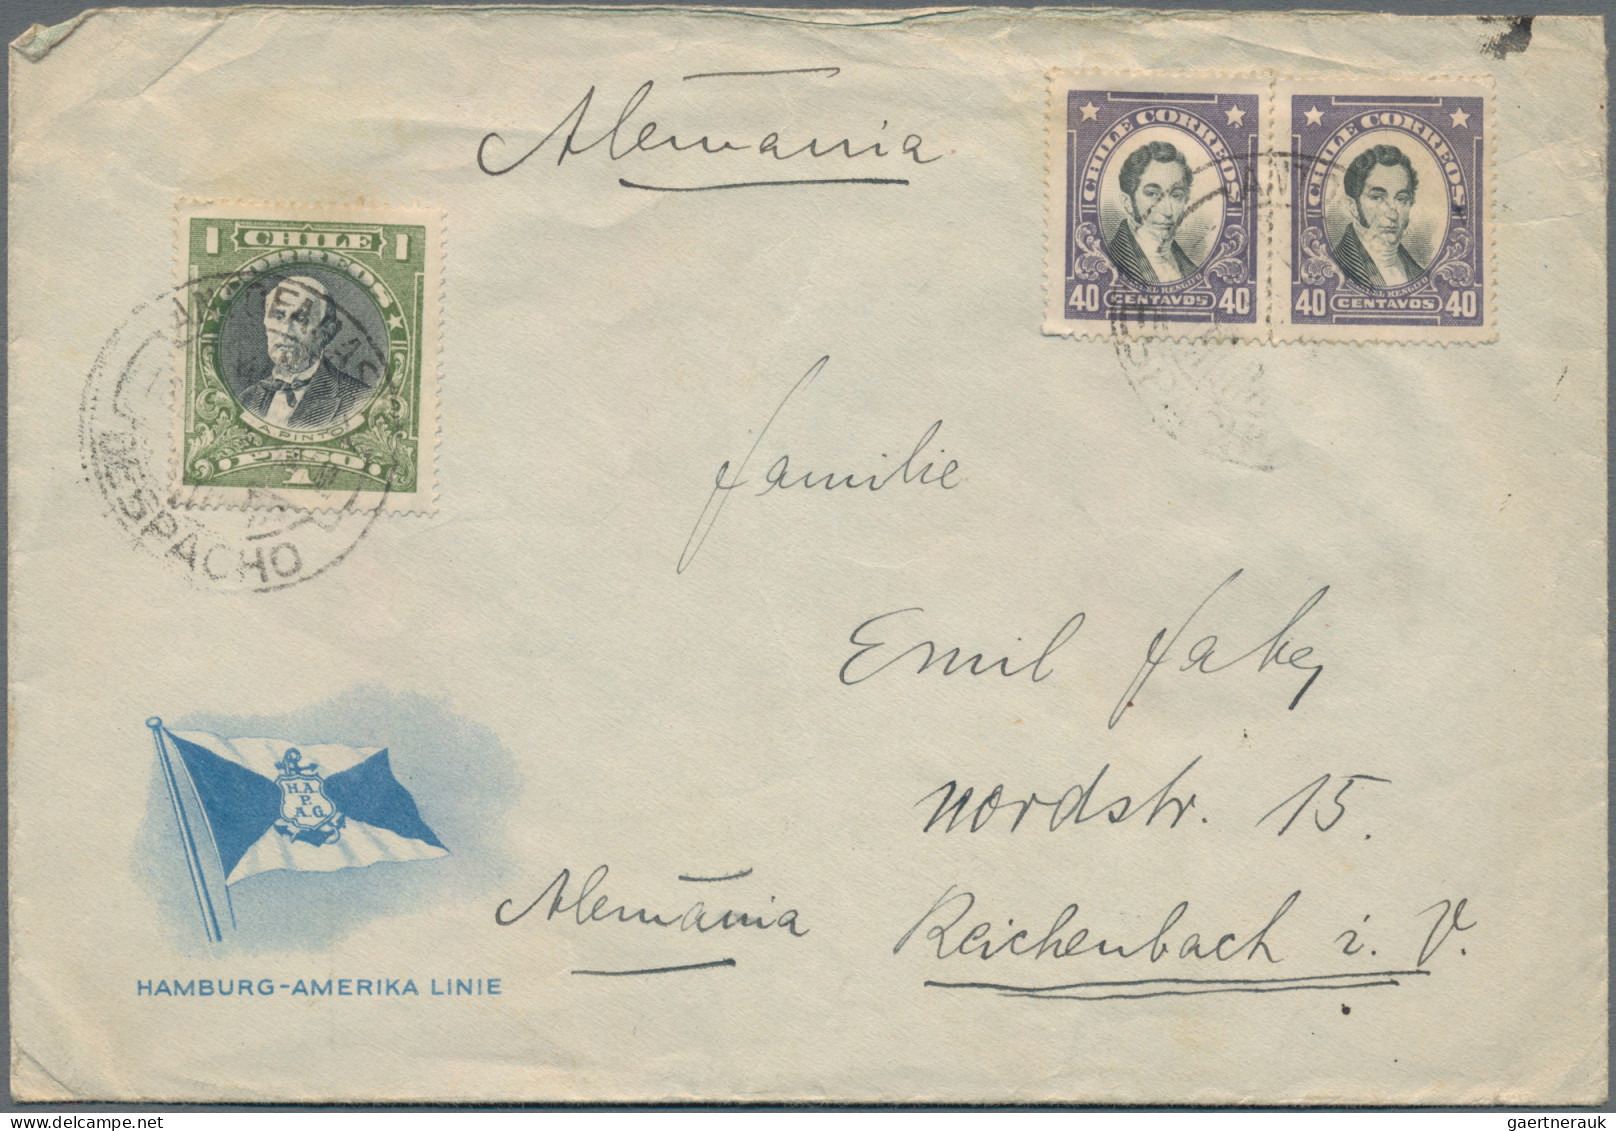 Oversea: 1880's-1980's (c.): About 200 covers, postcards and postal stationery i